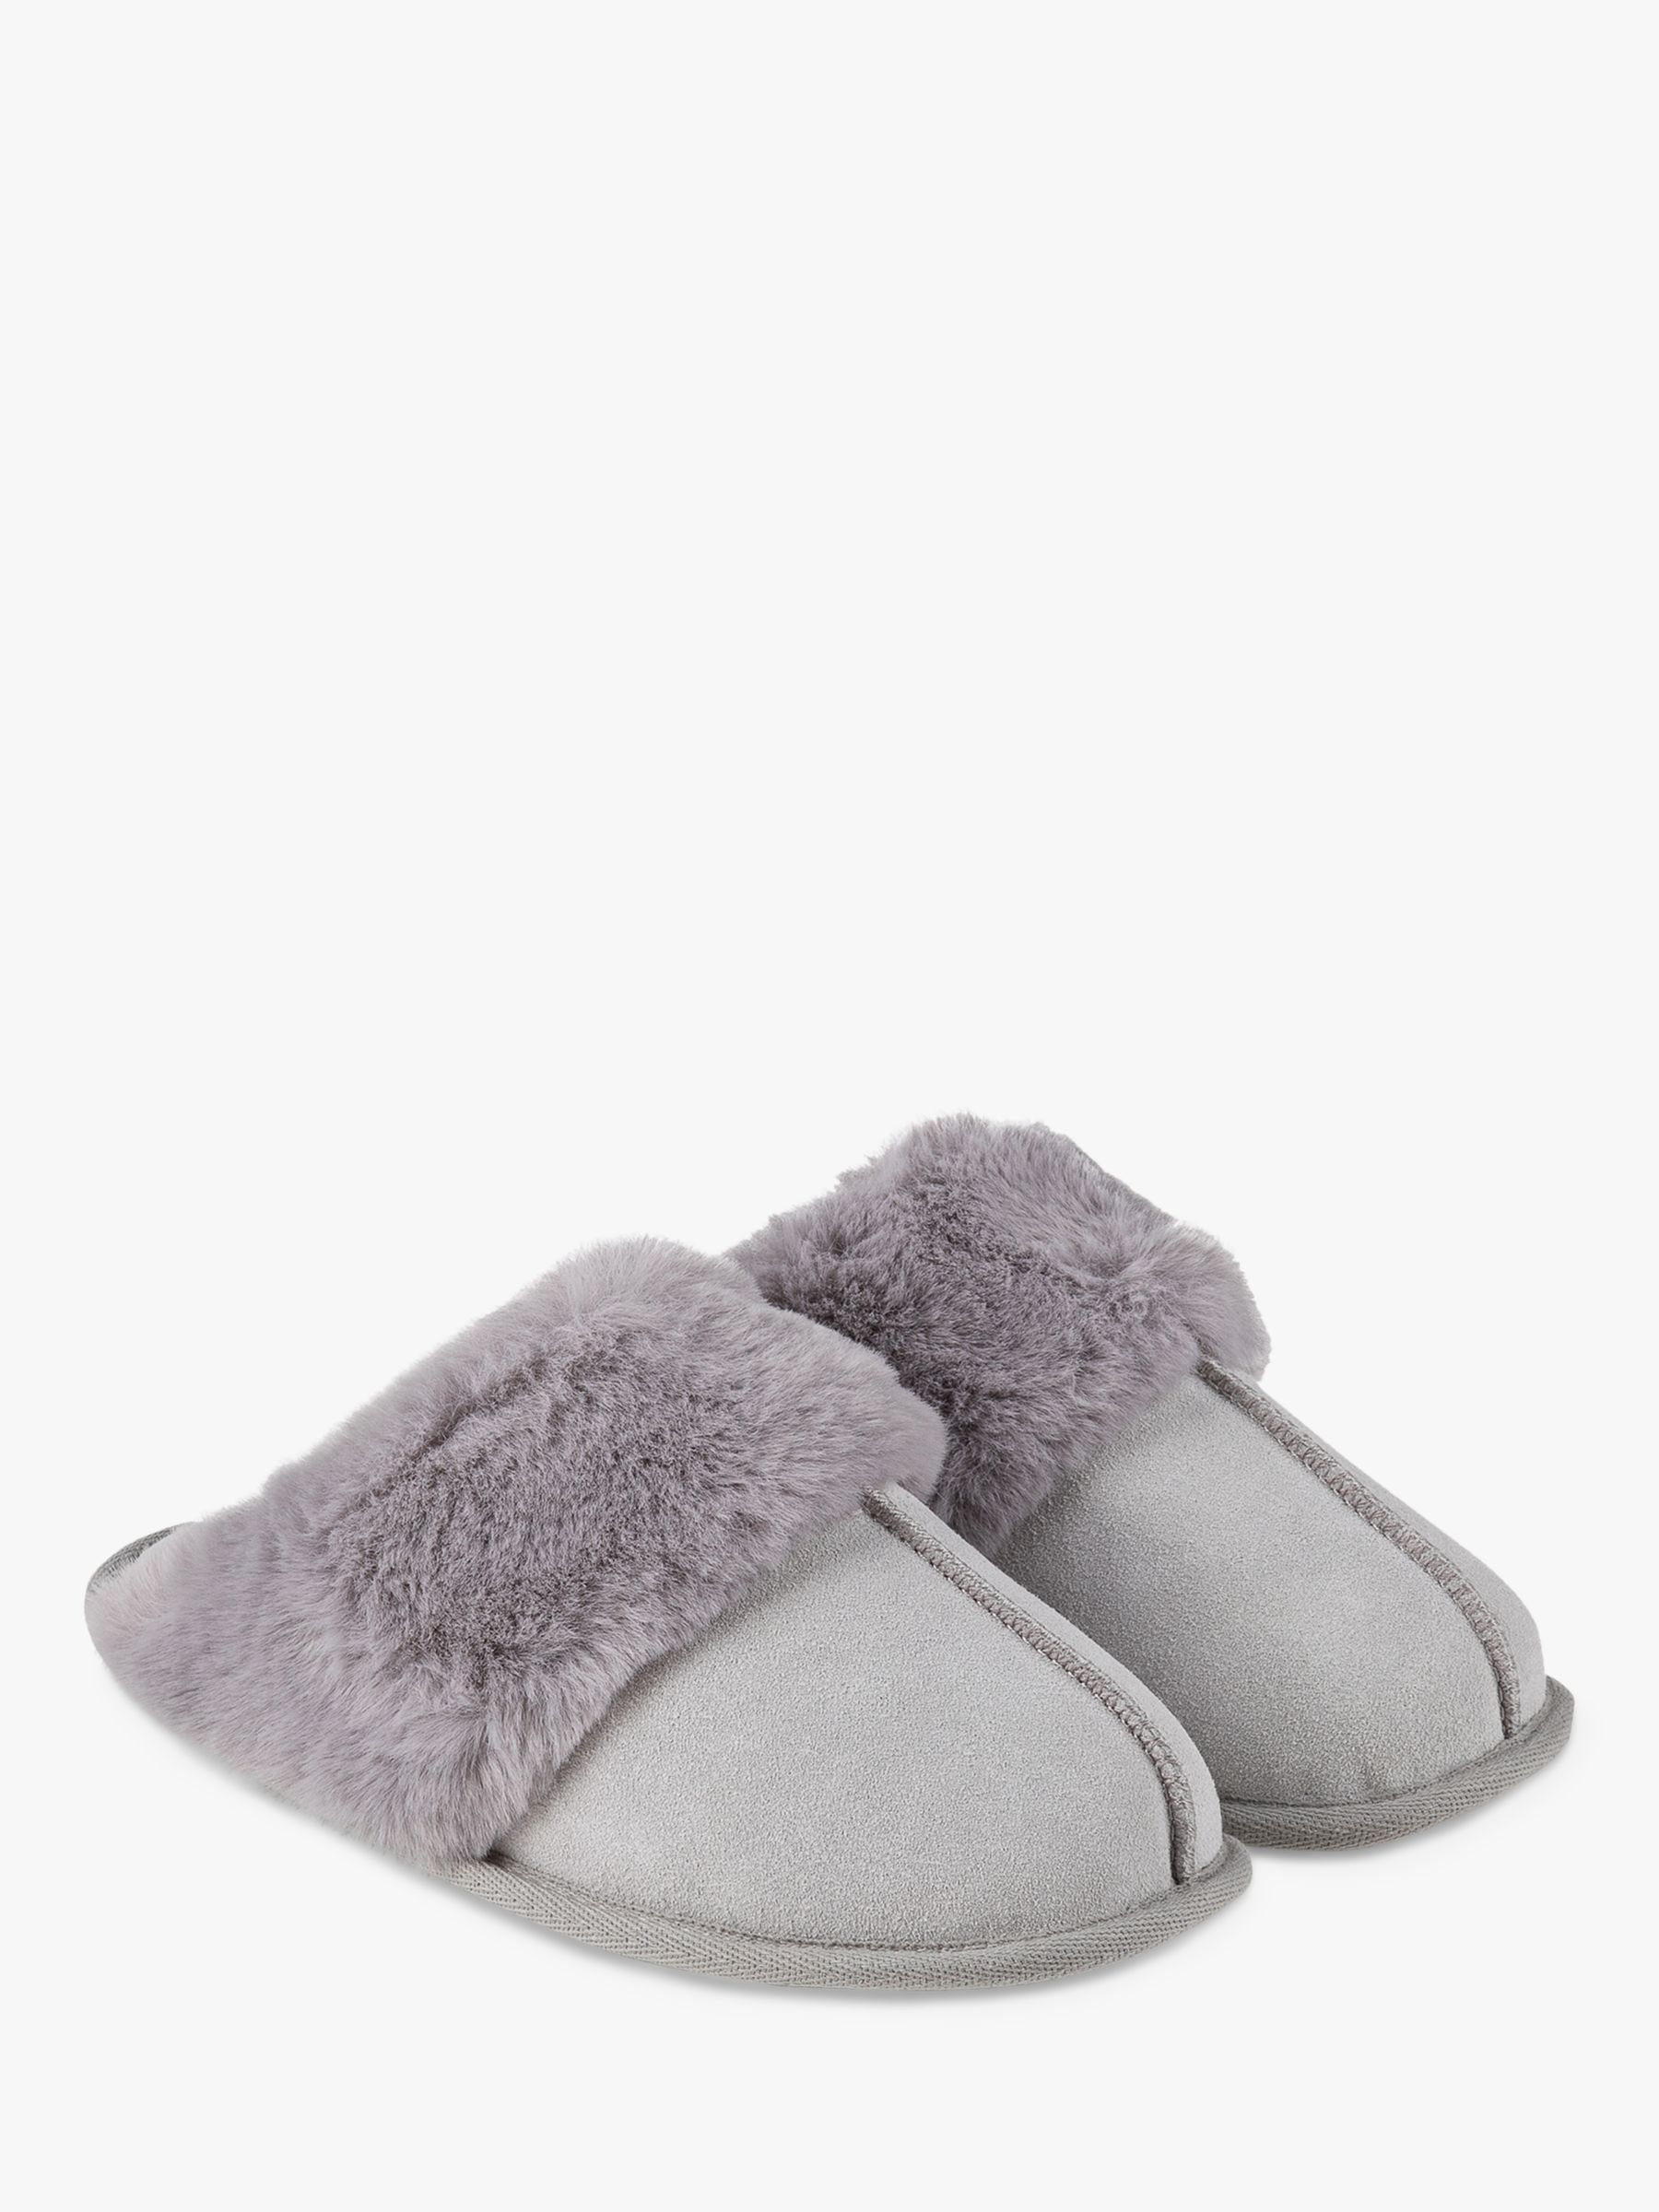 totes Real Suede with Fur Cuff Slippers, Grey at John Lewis & Partners